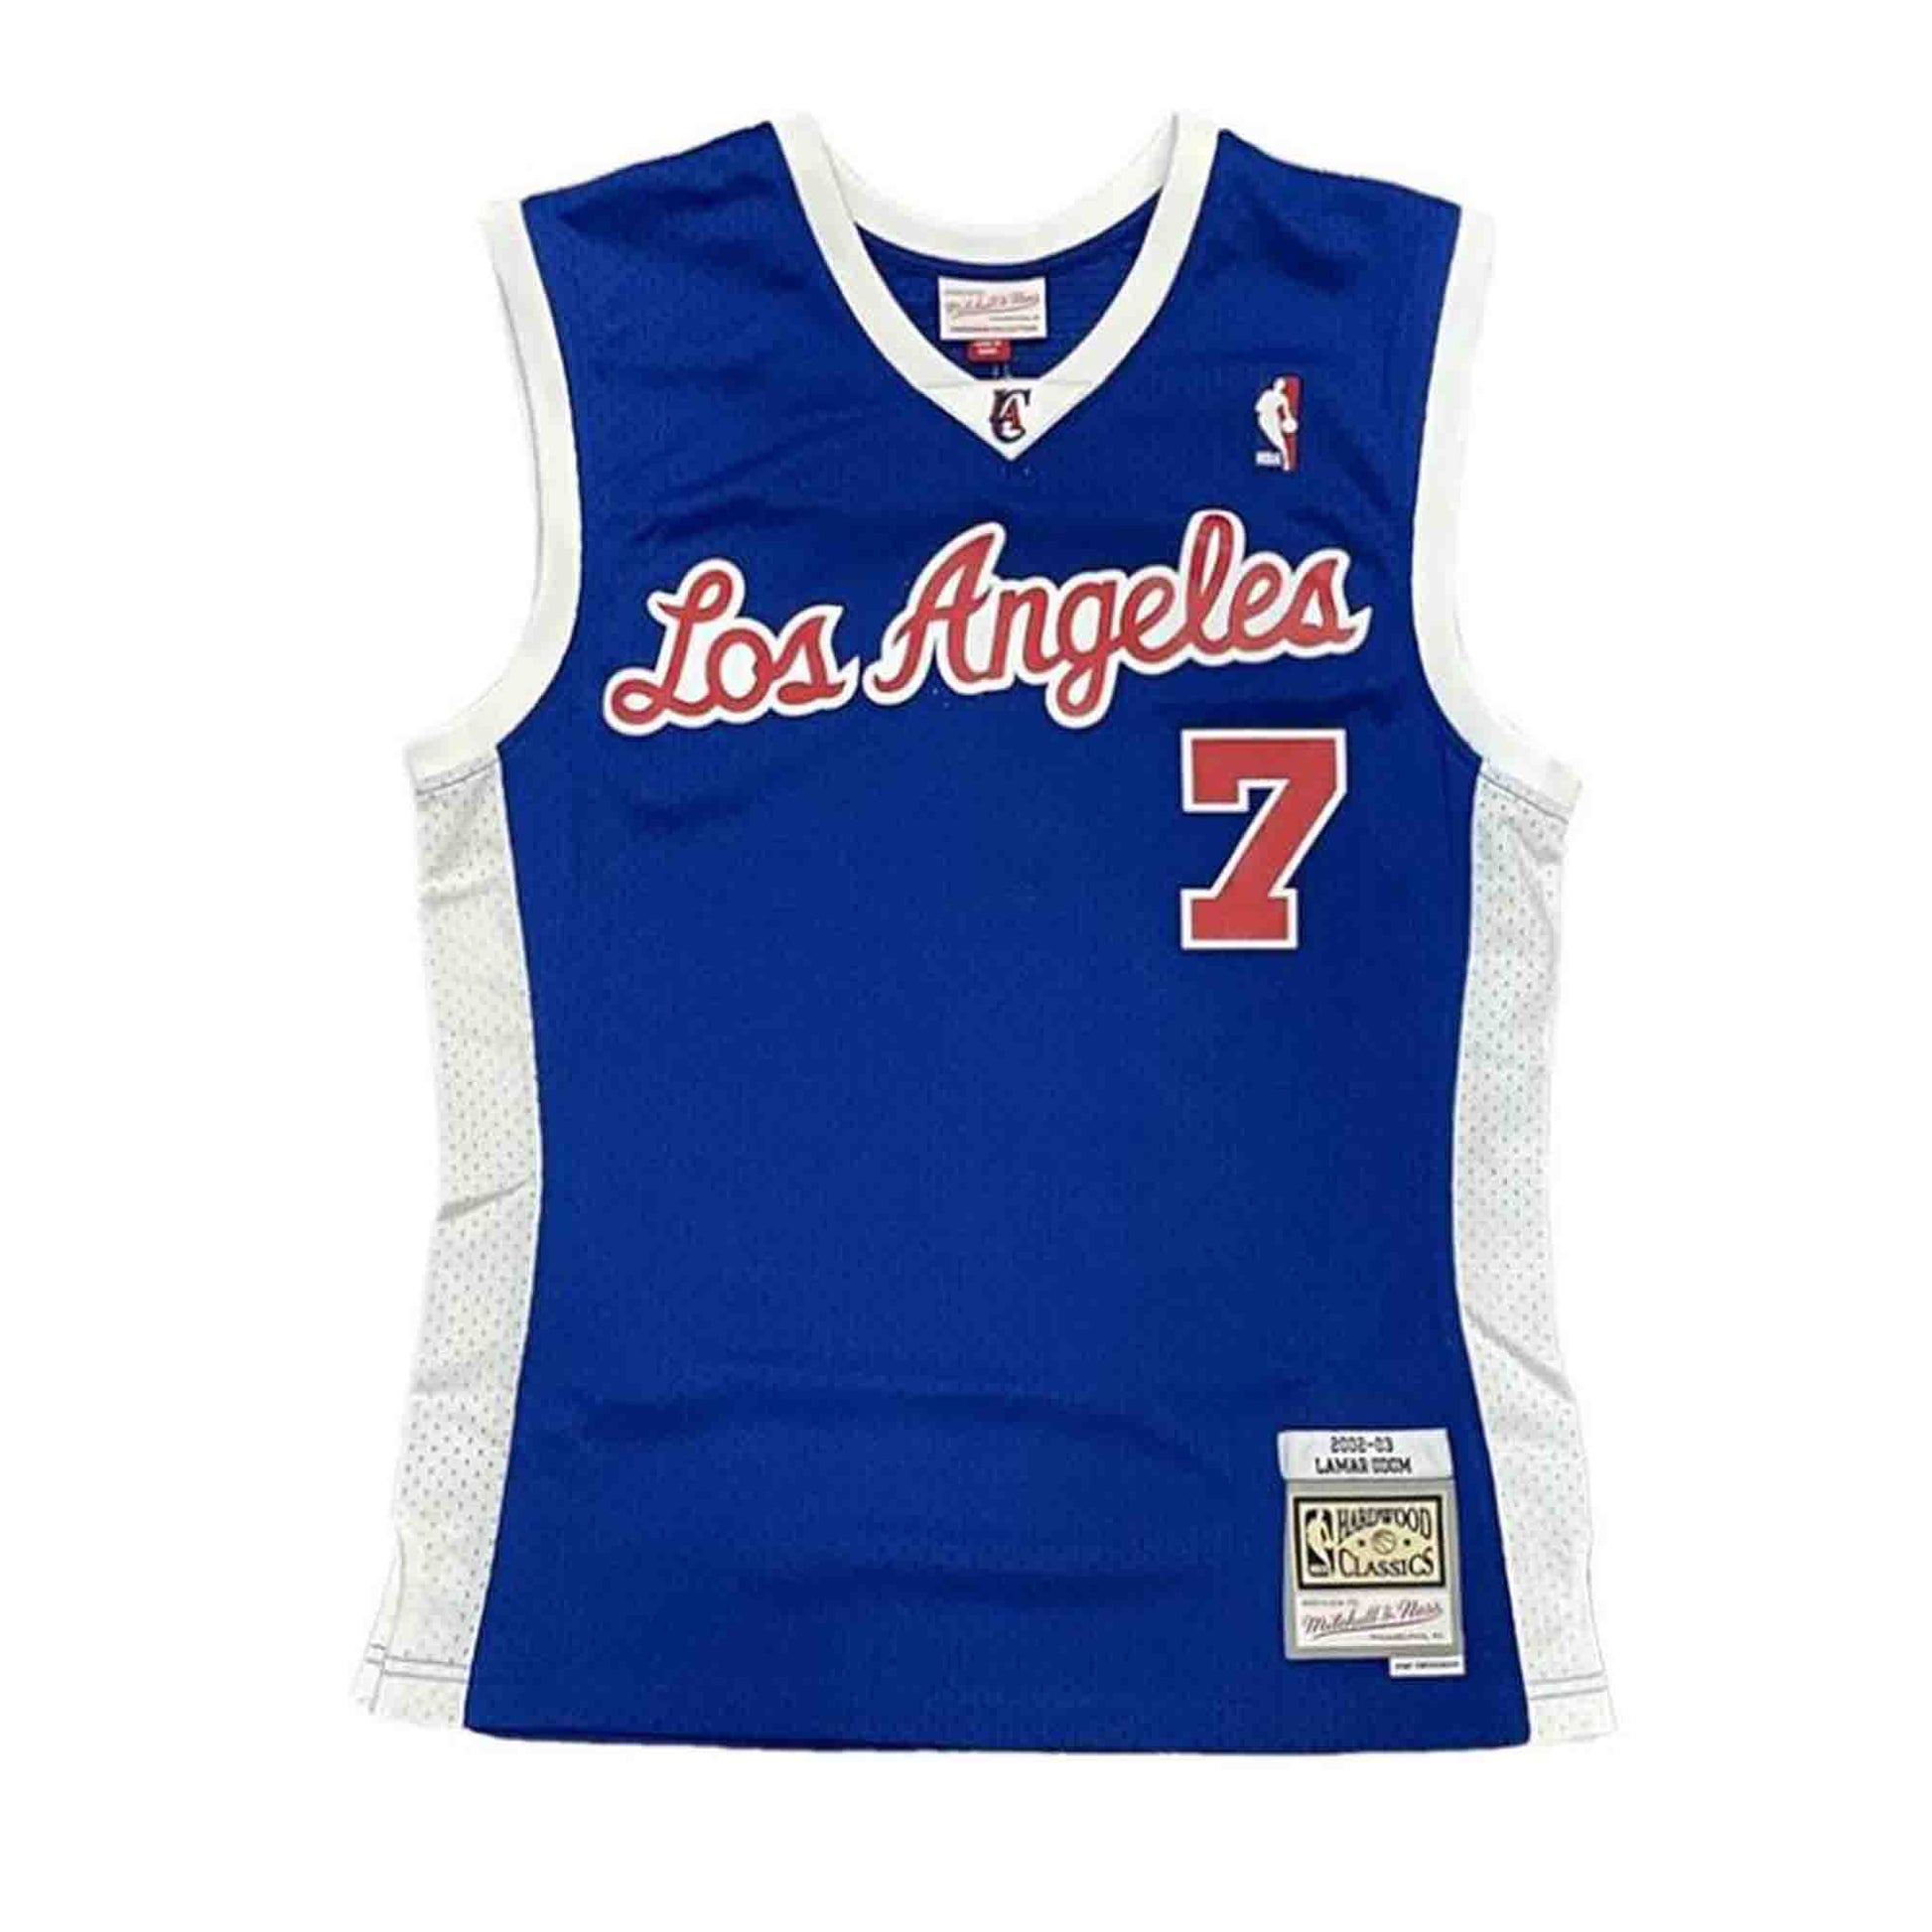  adidas Los Angeles Clippers NBA Blue NBA Authentic On